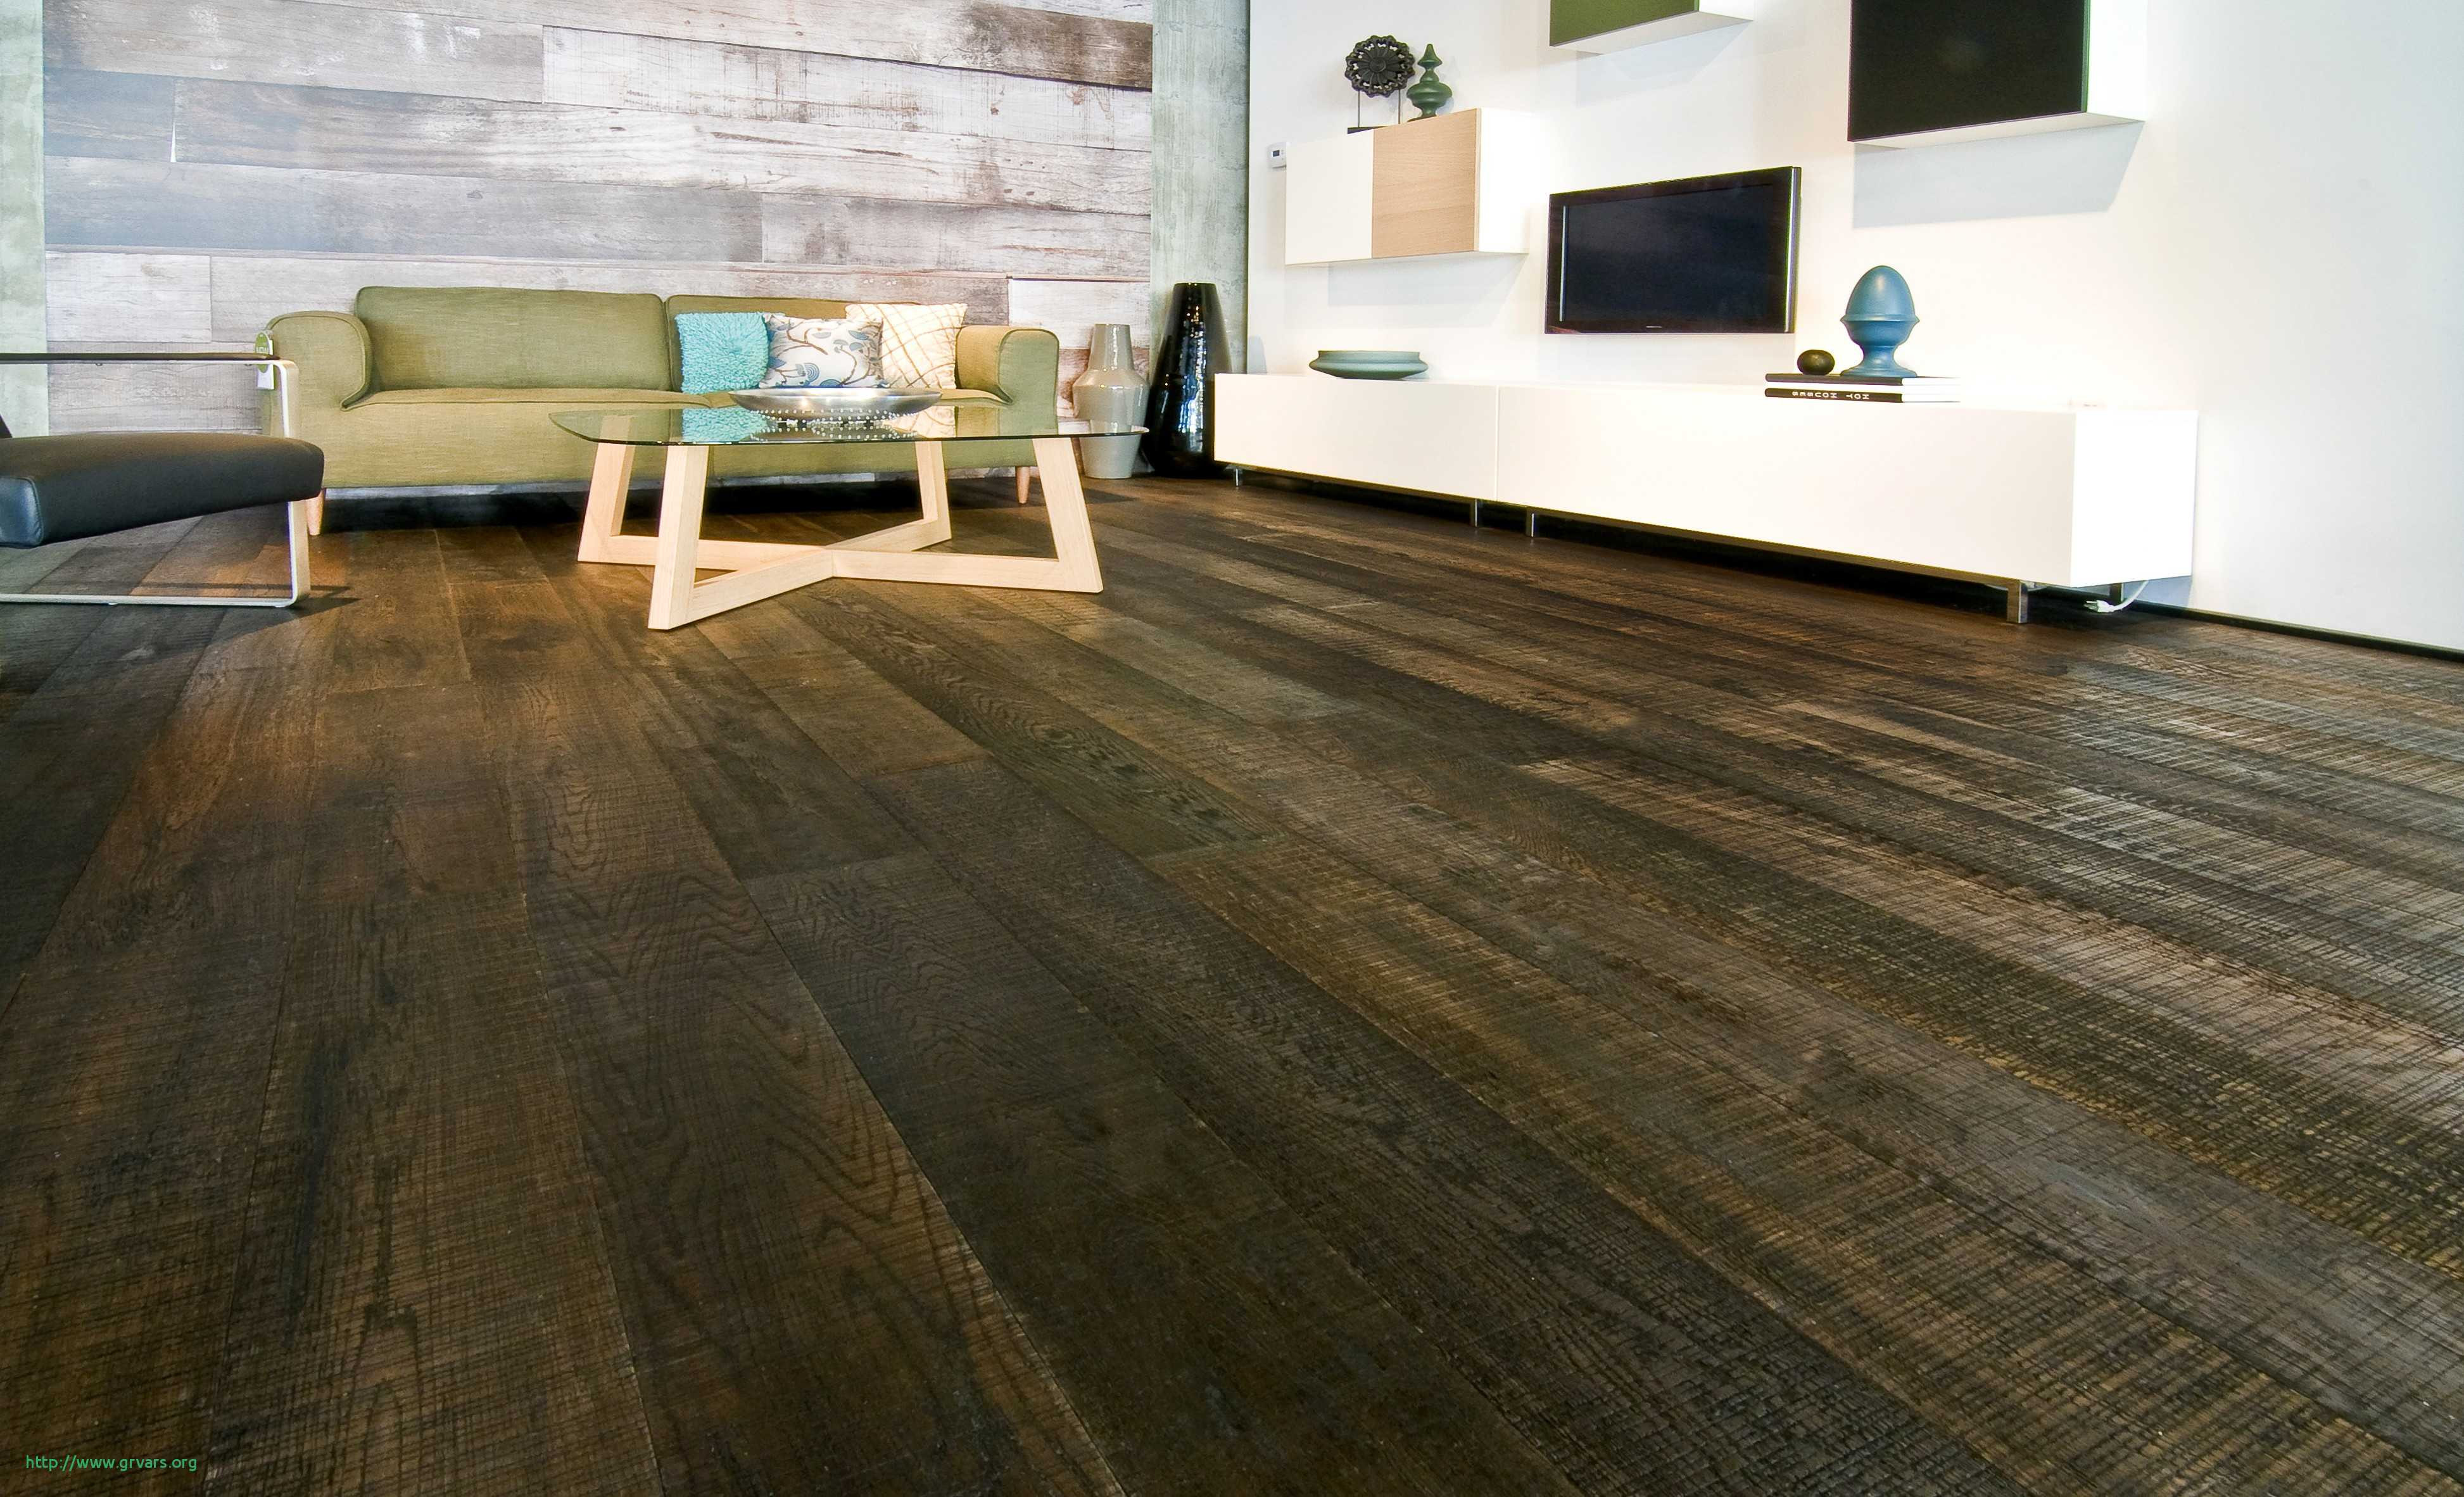 18 Recommended the Hardwood Flooring Stores Markham On 2024 free download the hardwood flooring stores markham on of 21 beau cheapest hardwood flooring in toronto ideas blog in cheapest hardwood flooring in toronto charmant engaging discount hardwood flooring 5 wh